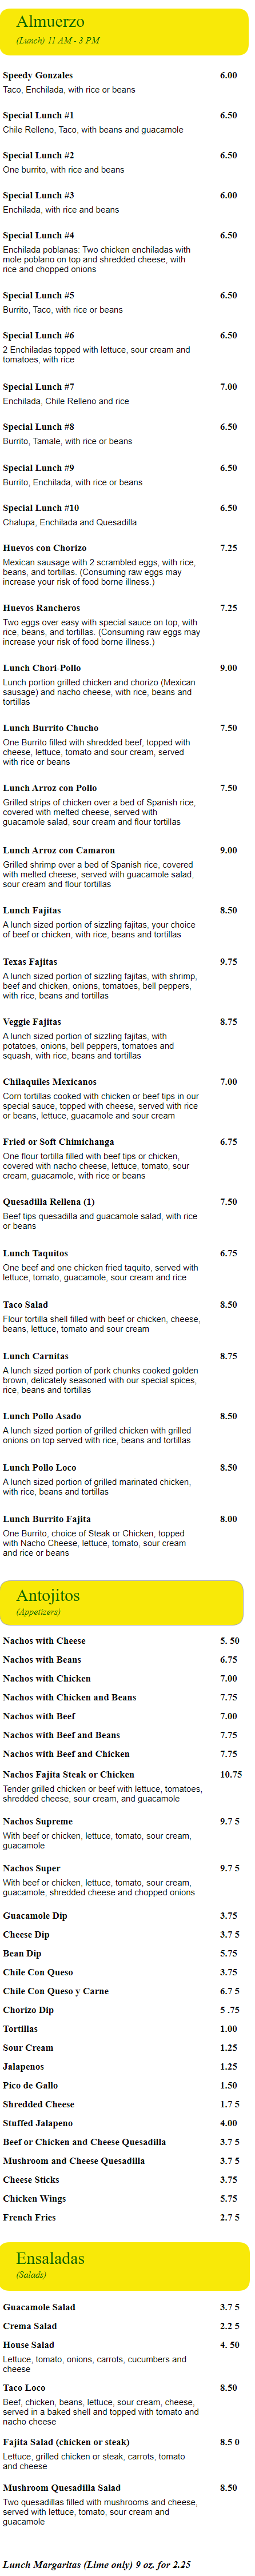 Appetizers and Lunch Menu